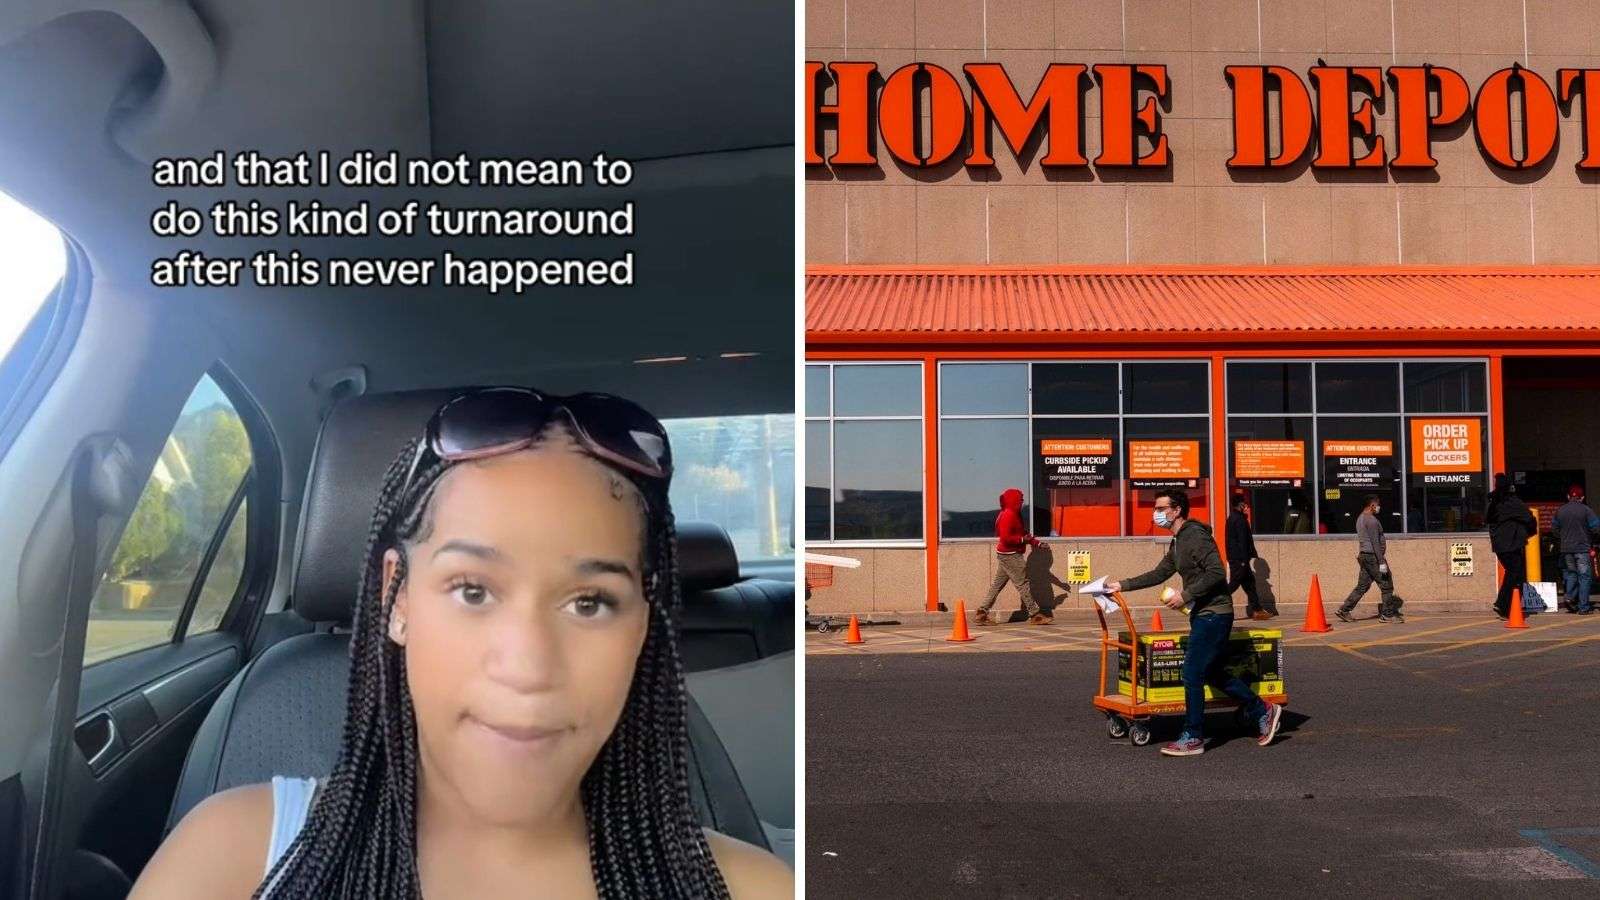 Texas woman goes to Home Depot in Mexico